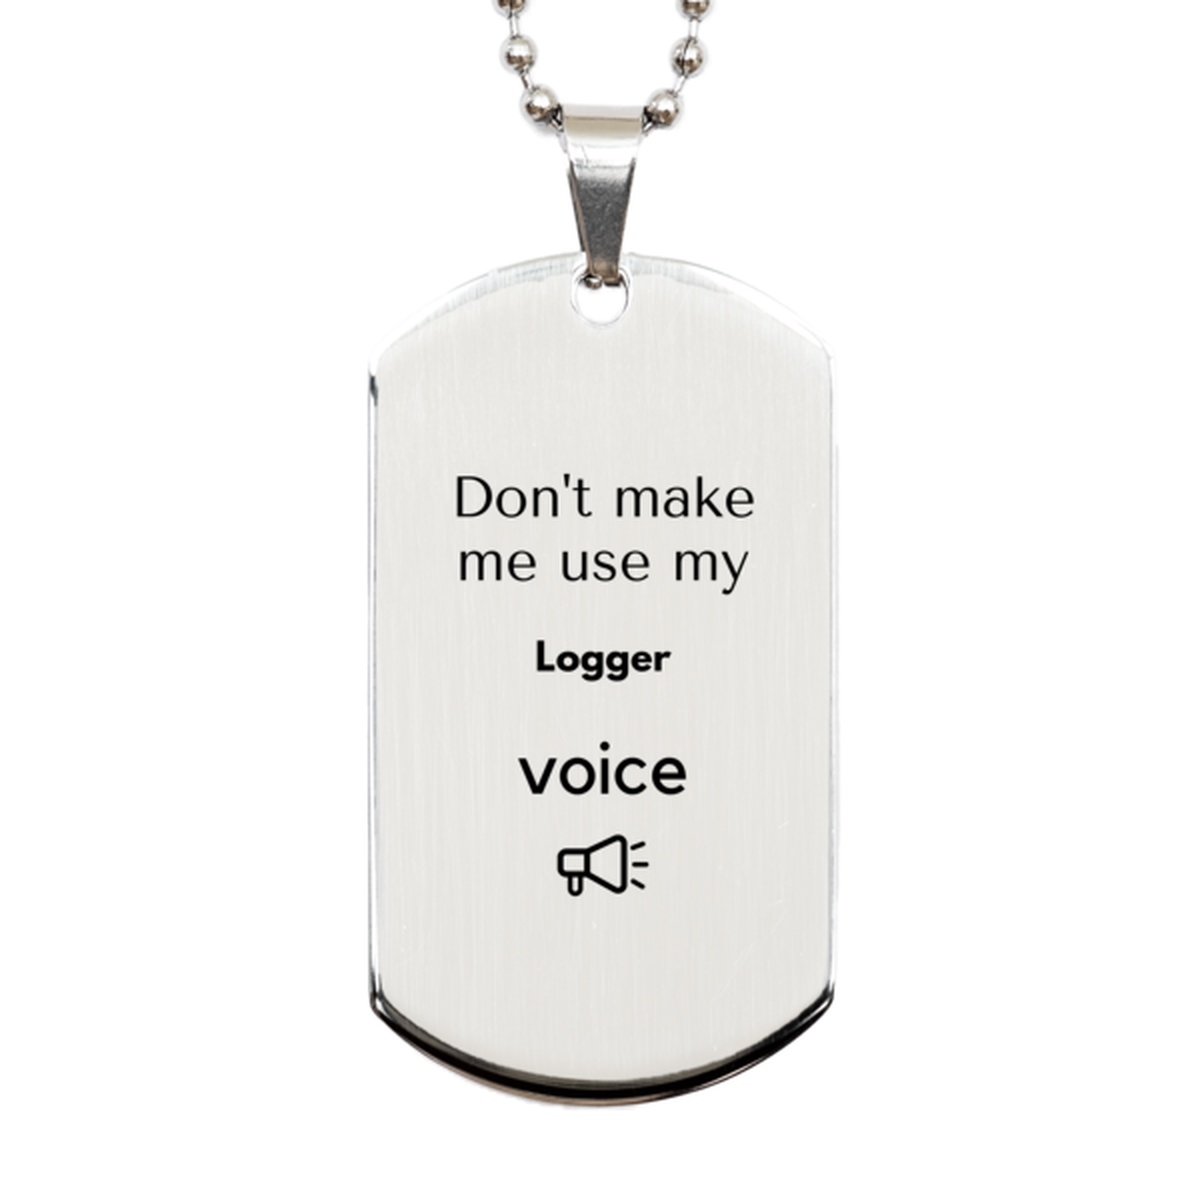 Don't make me use my Logger voice, Sarcasm Logger Gifts, Christmas Logger Silver Dog Tag Birthday Unique Gifts For Logger Coworkers, Men, Women, Colleague, Friends